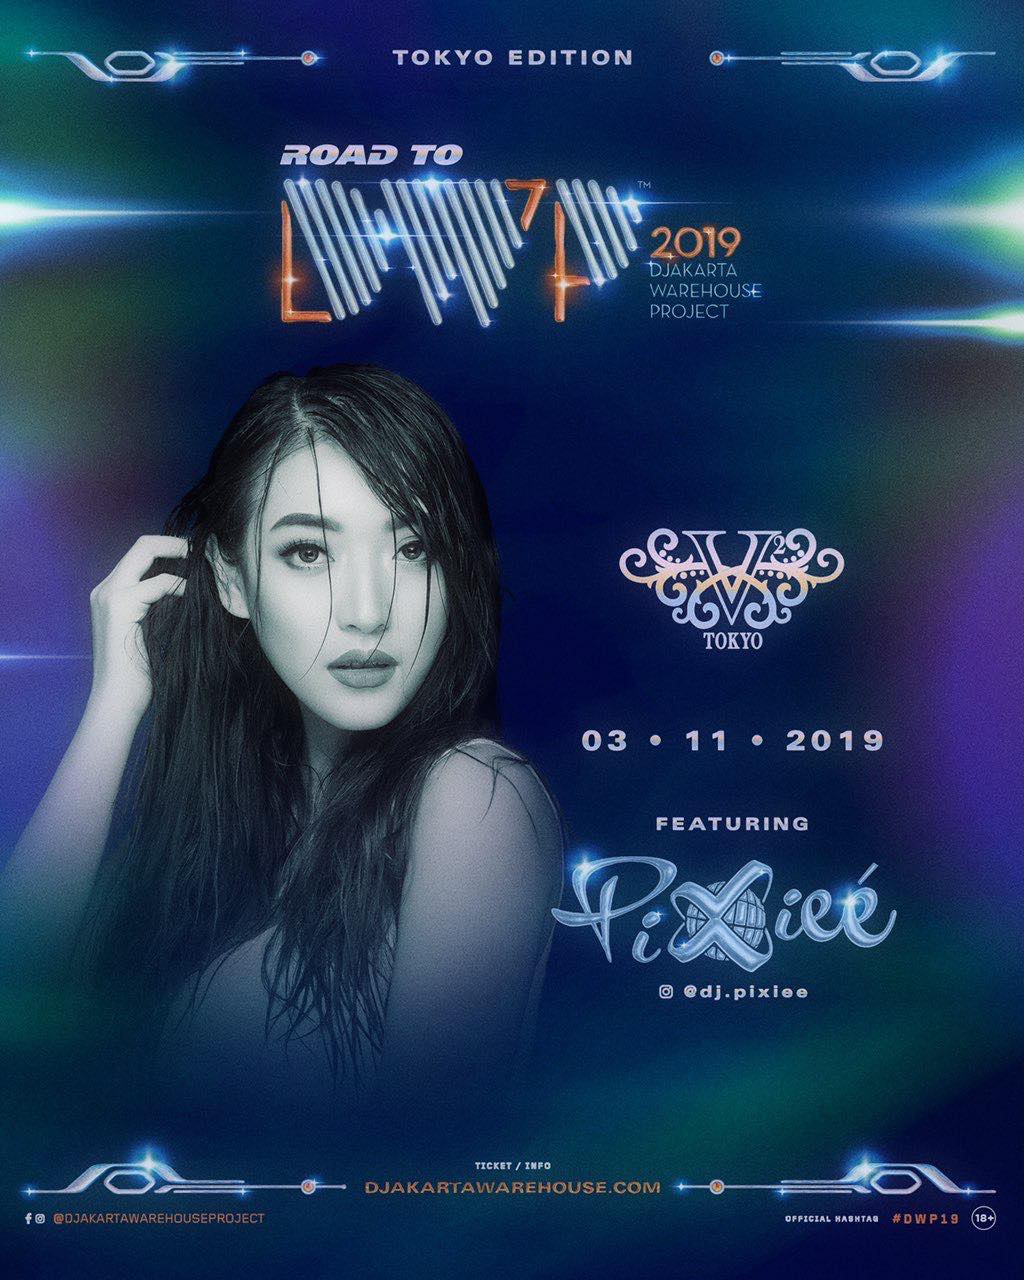 Road to DWP19 Tokyo Edition feat. Pixiee来日公演